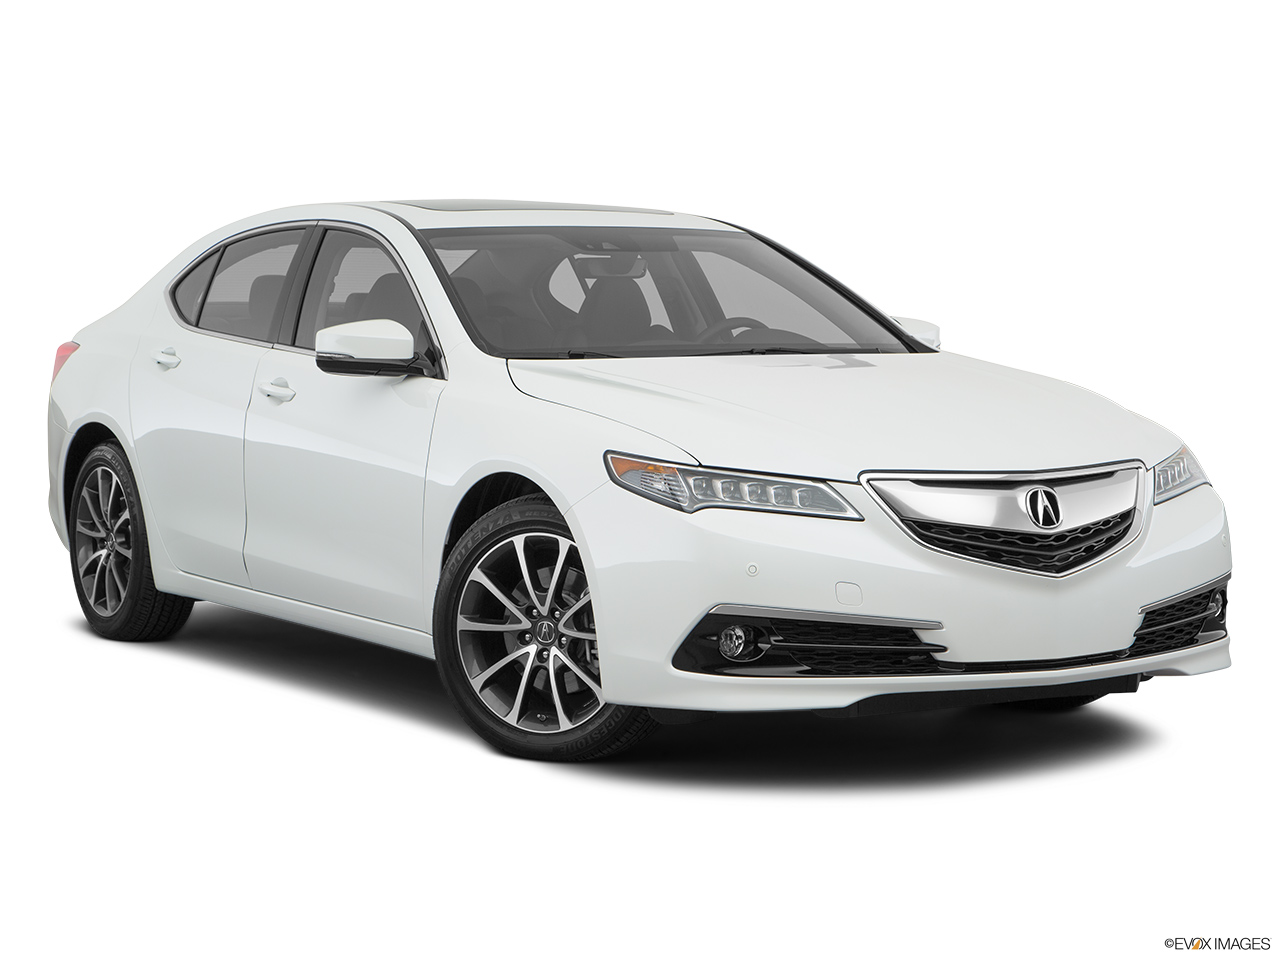 2017 Acura TLX 3.5L Front passenger 3/4 w/ wheels turned. 